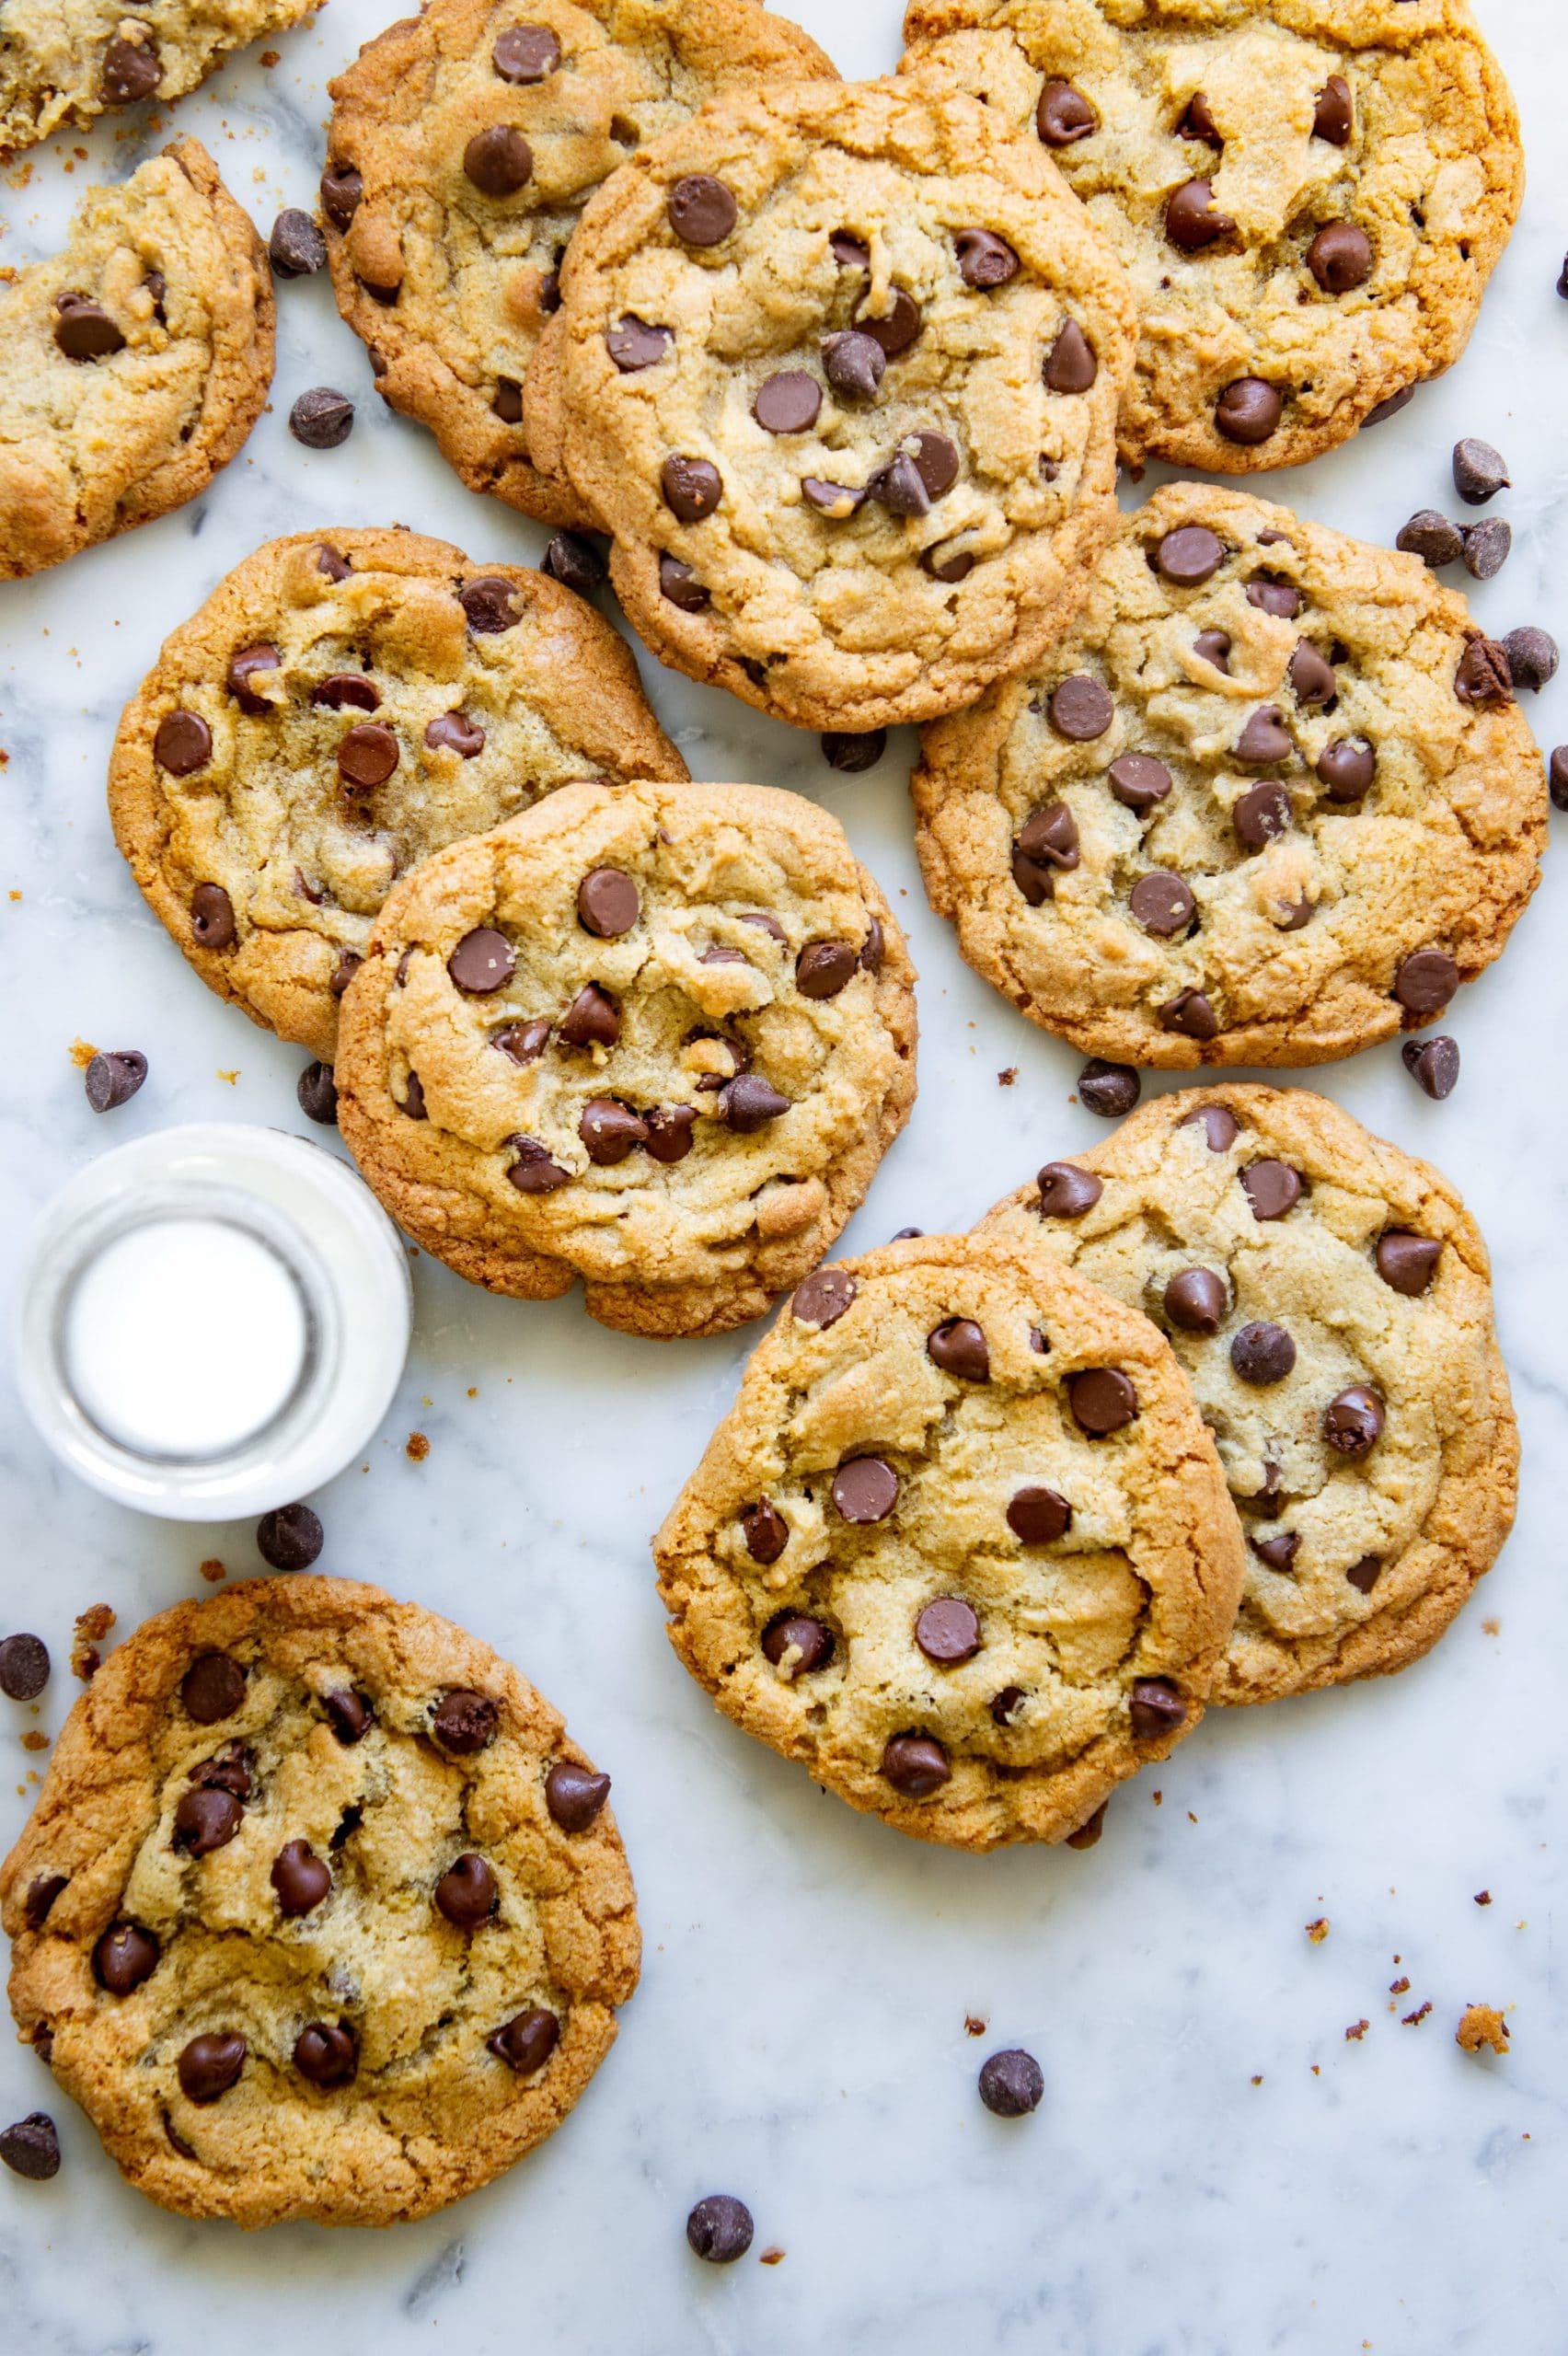 Easy Chocolate Chip Cookies - OwlbBaking.com Cookie Recipes